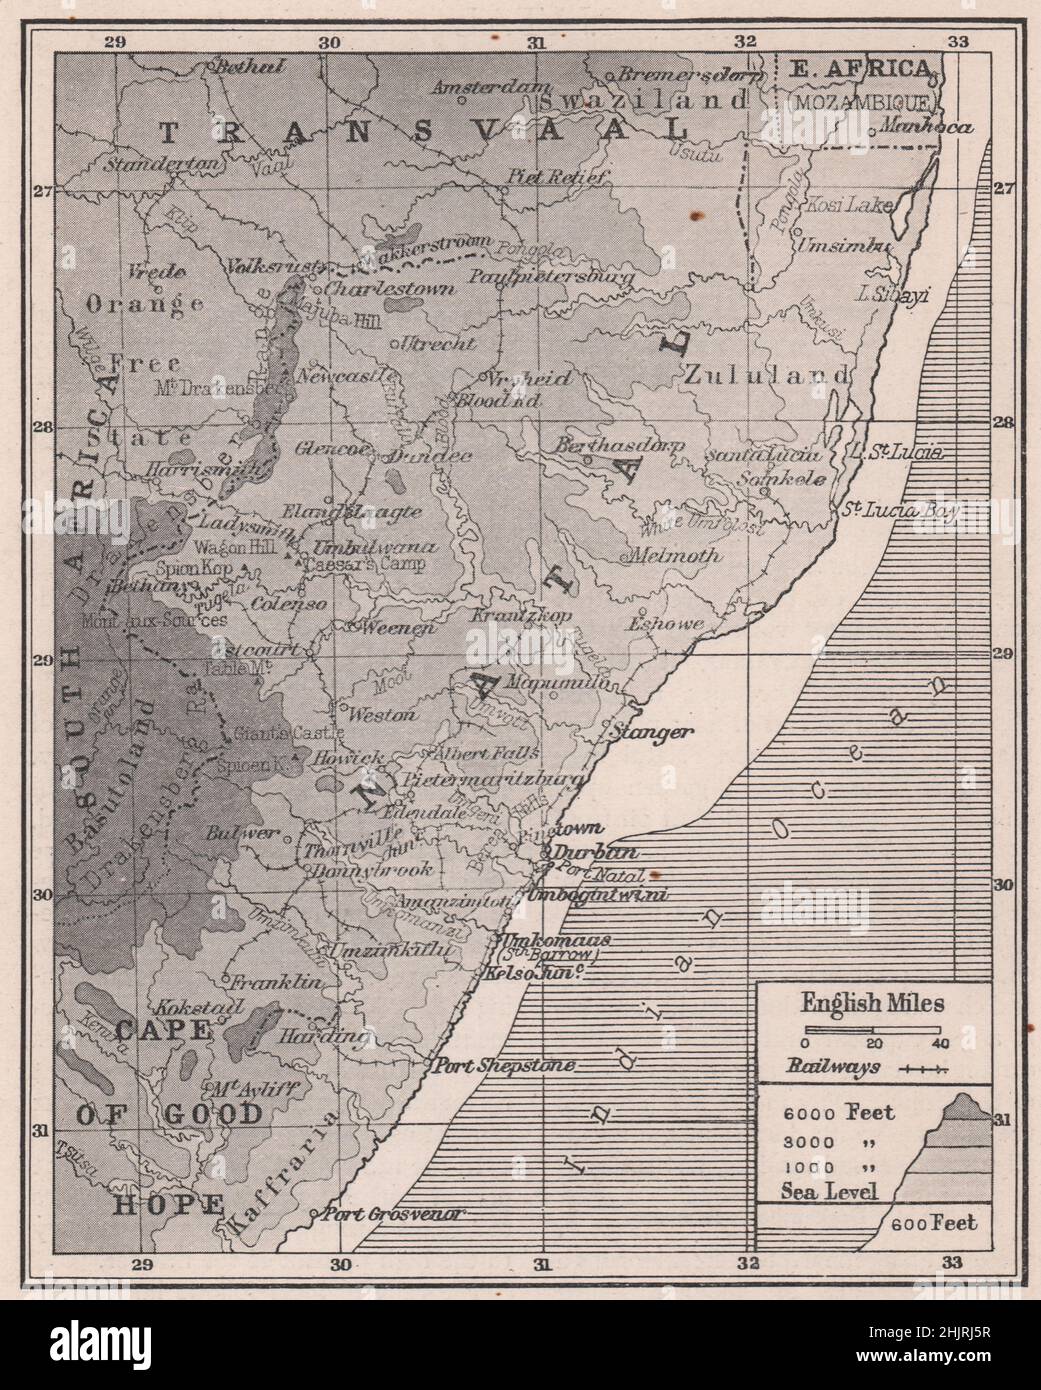 Natal shut off from Africa by the Drakensberg Mountains. South Africa (1923 map) Stock Photo